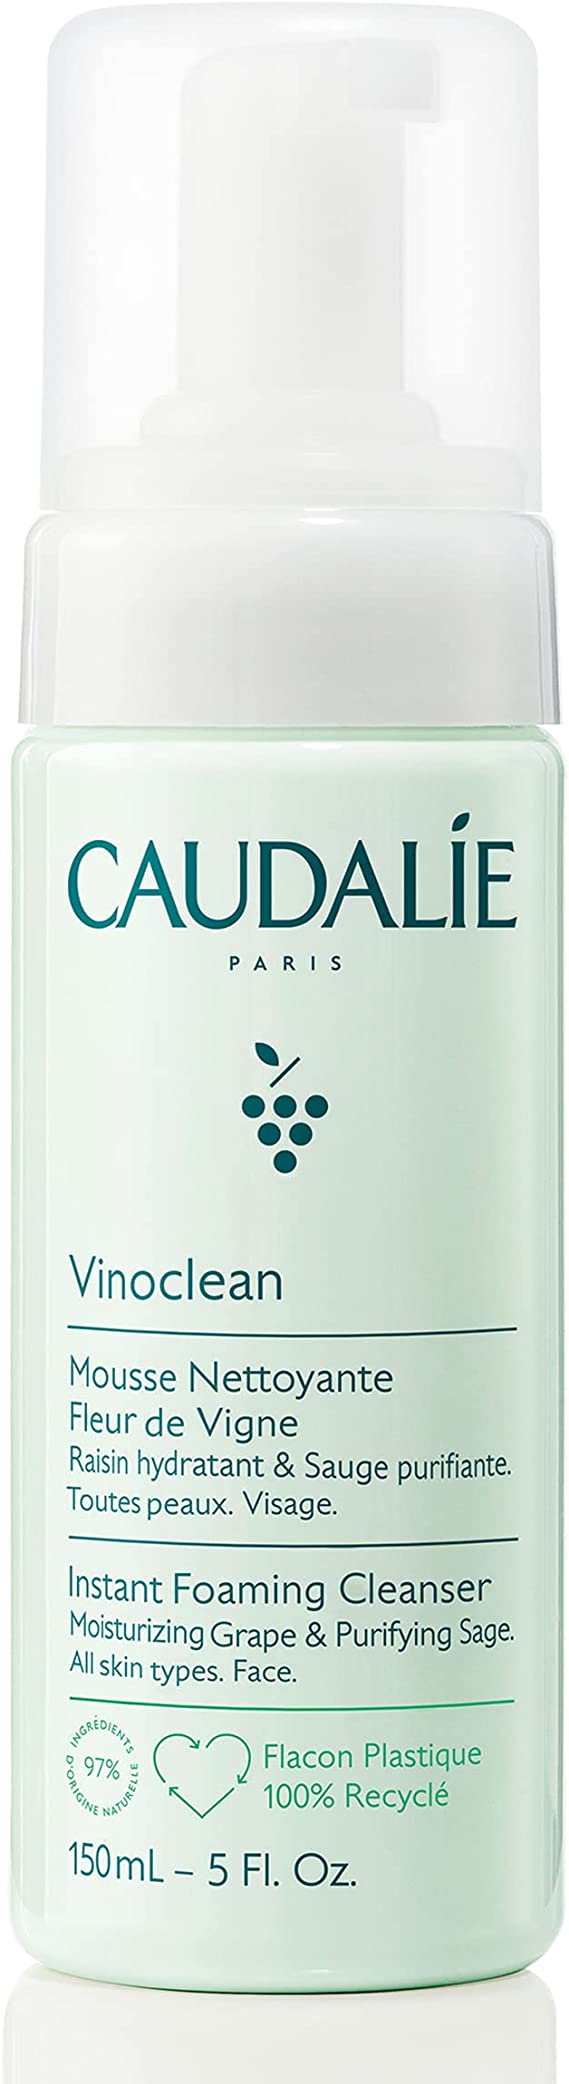 Caudalie Exfoliating and Cleansing Masks